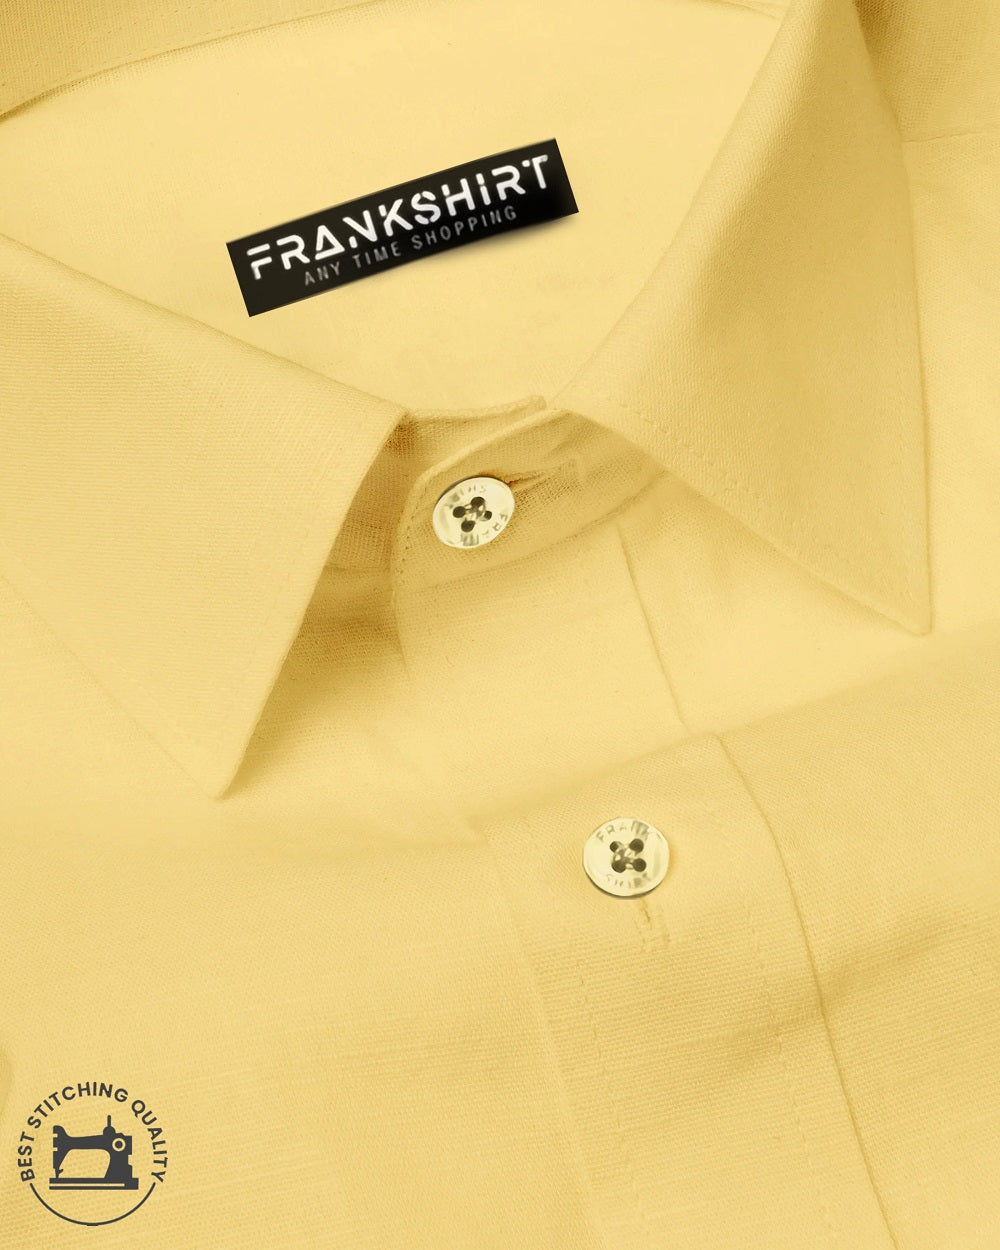 Pack of 2 Cotton Shirt for Man (Brown and Lemon)